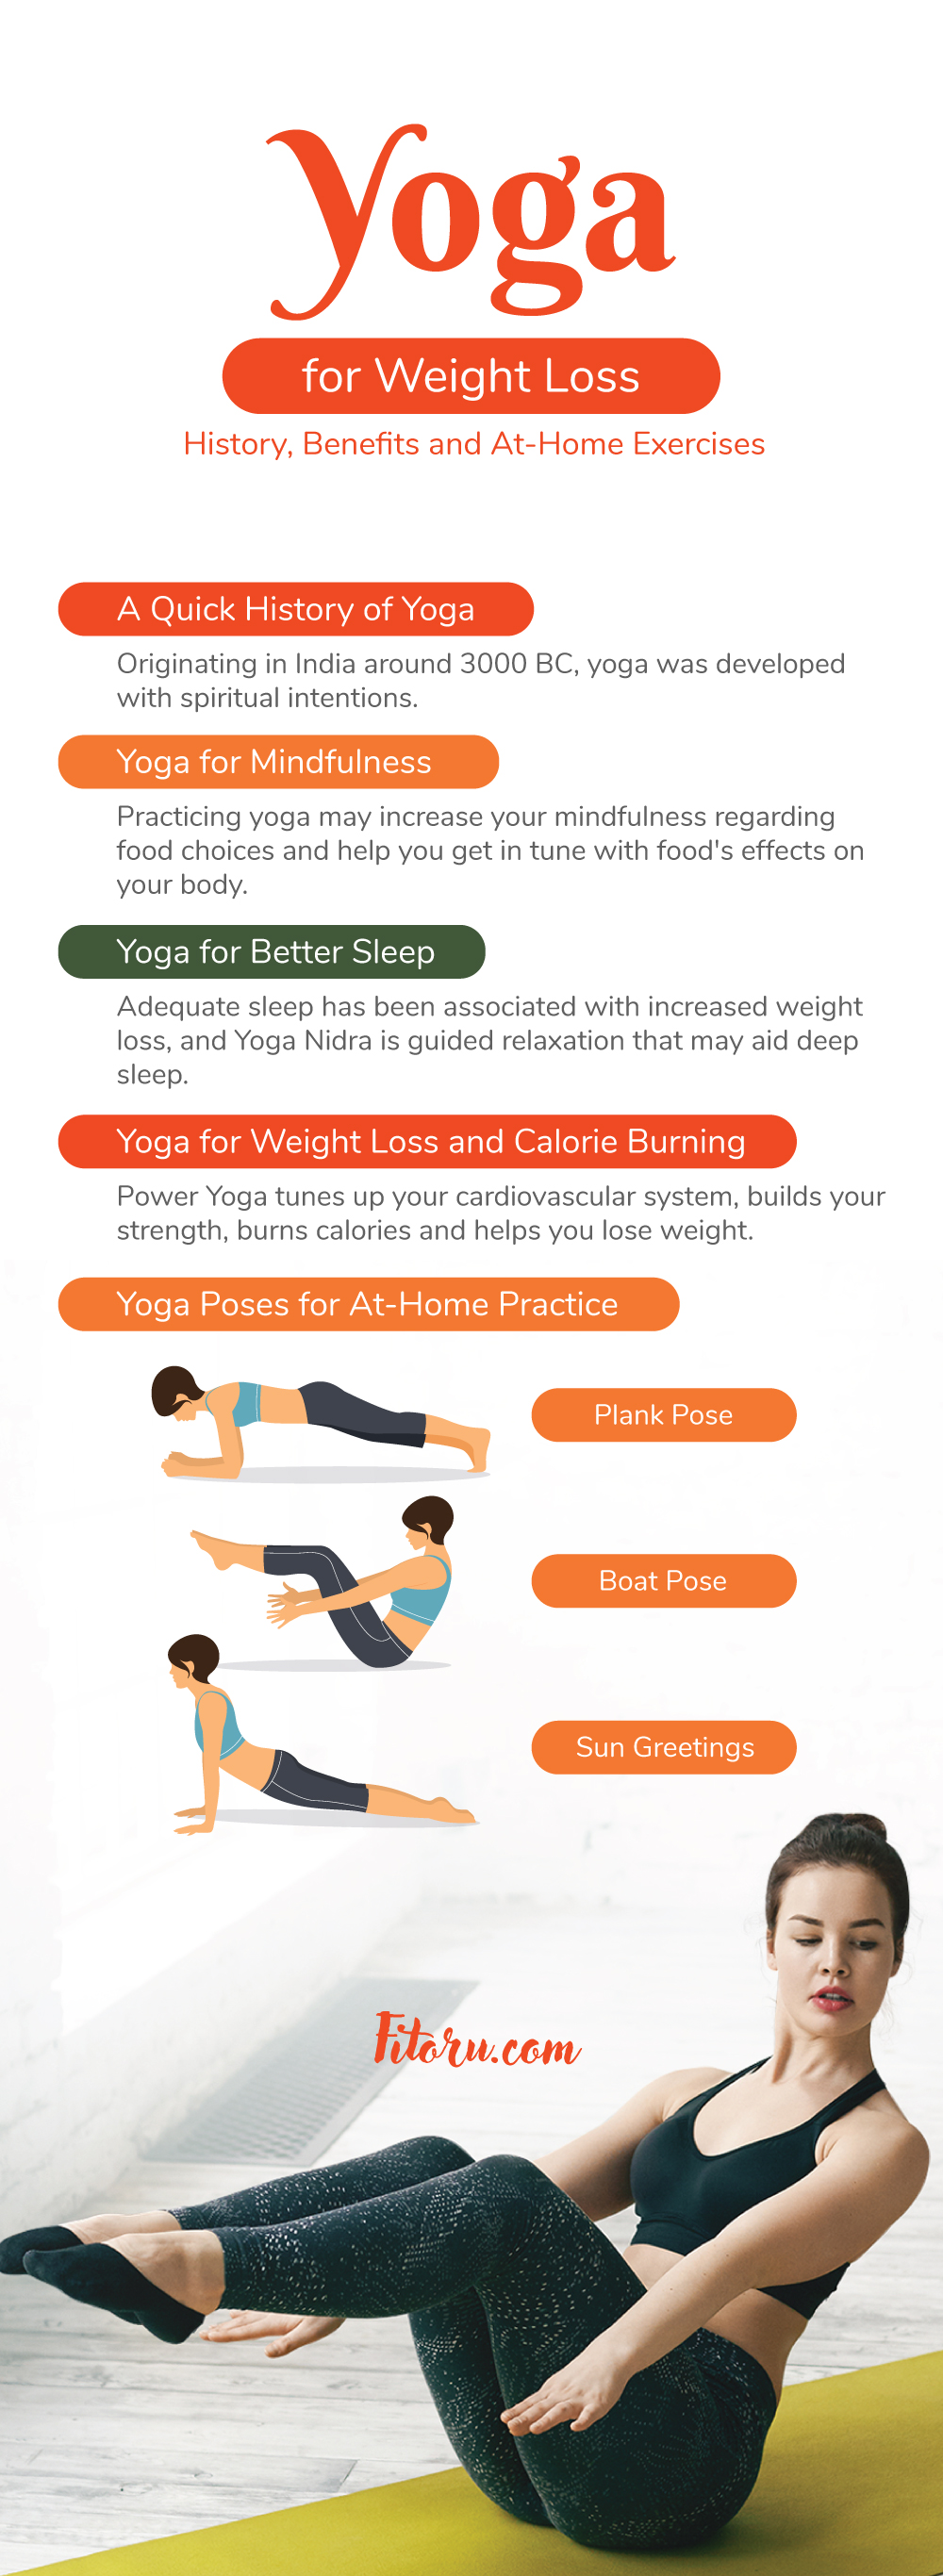 Yoga for weight loss and mindfulness.